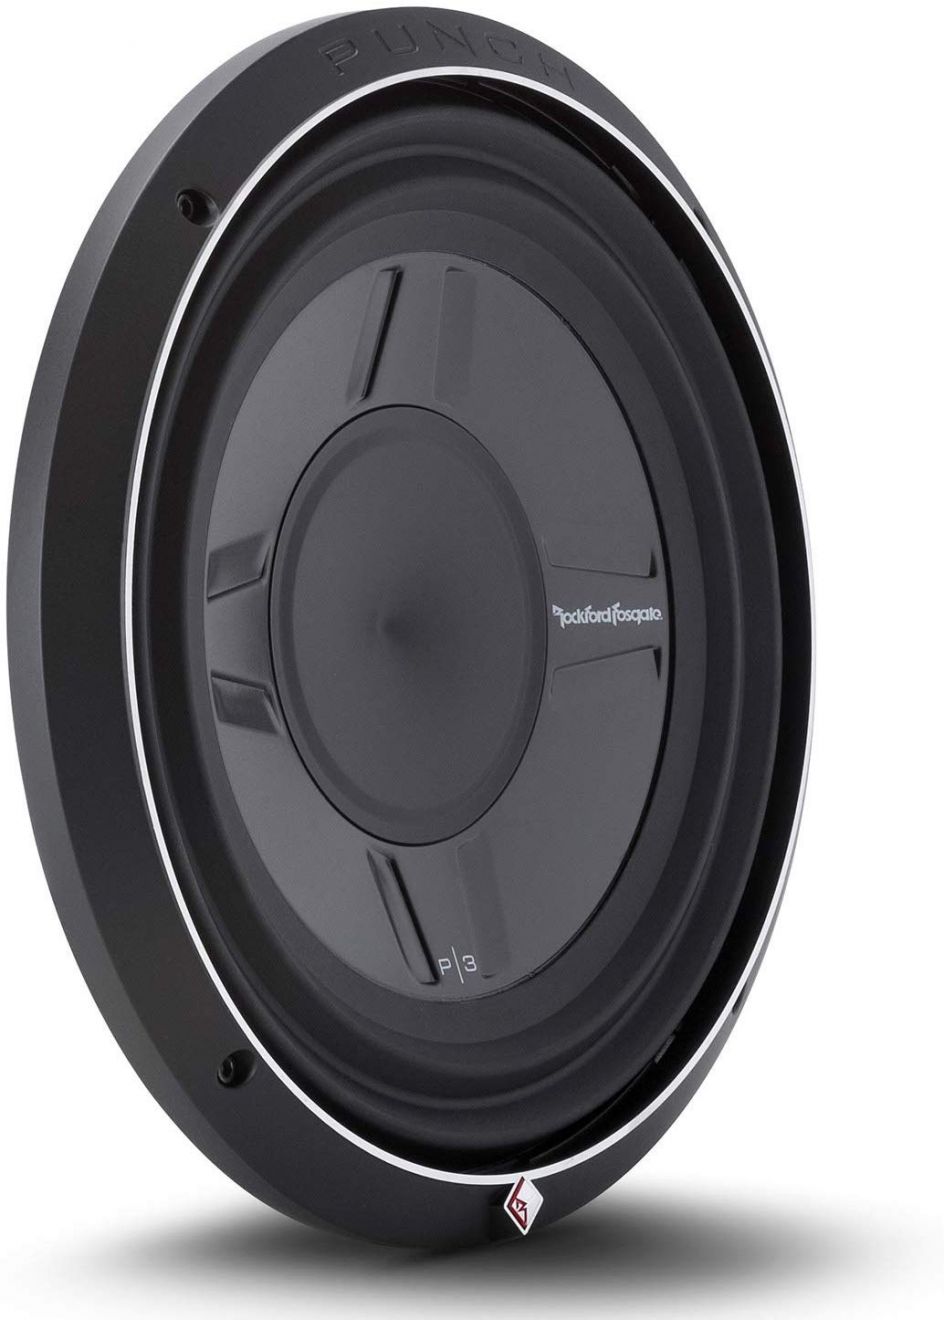 ROCKFORD FOSGATE P3SD2-8 PUNCH P3 SLIM SHALLOW 8" DVC 2-OHM SUBWOOFER  *NEW* 